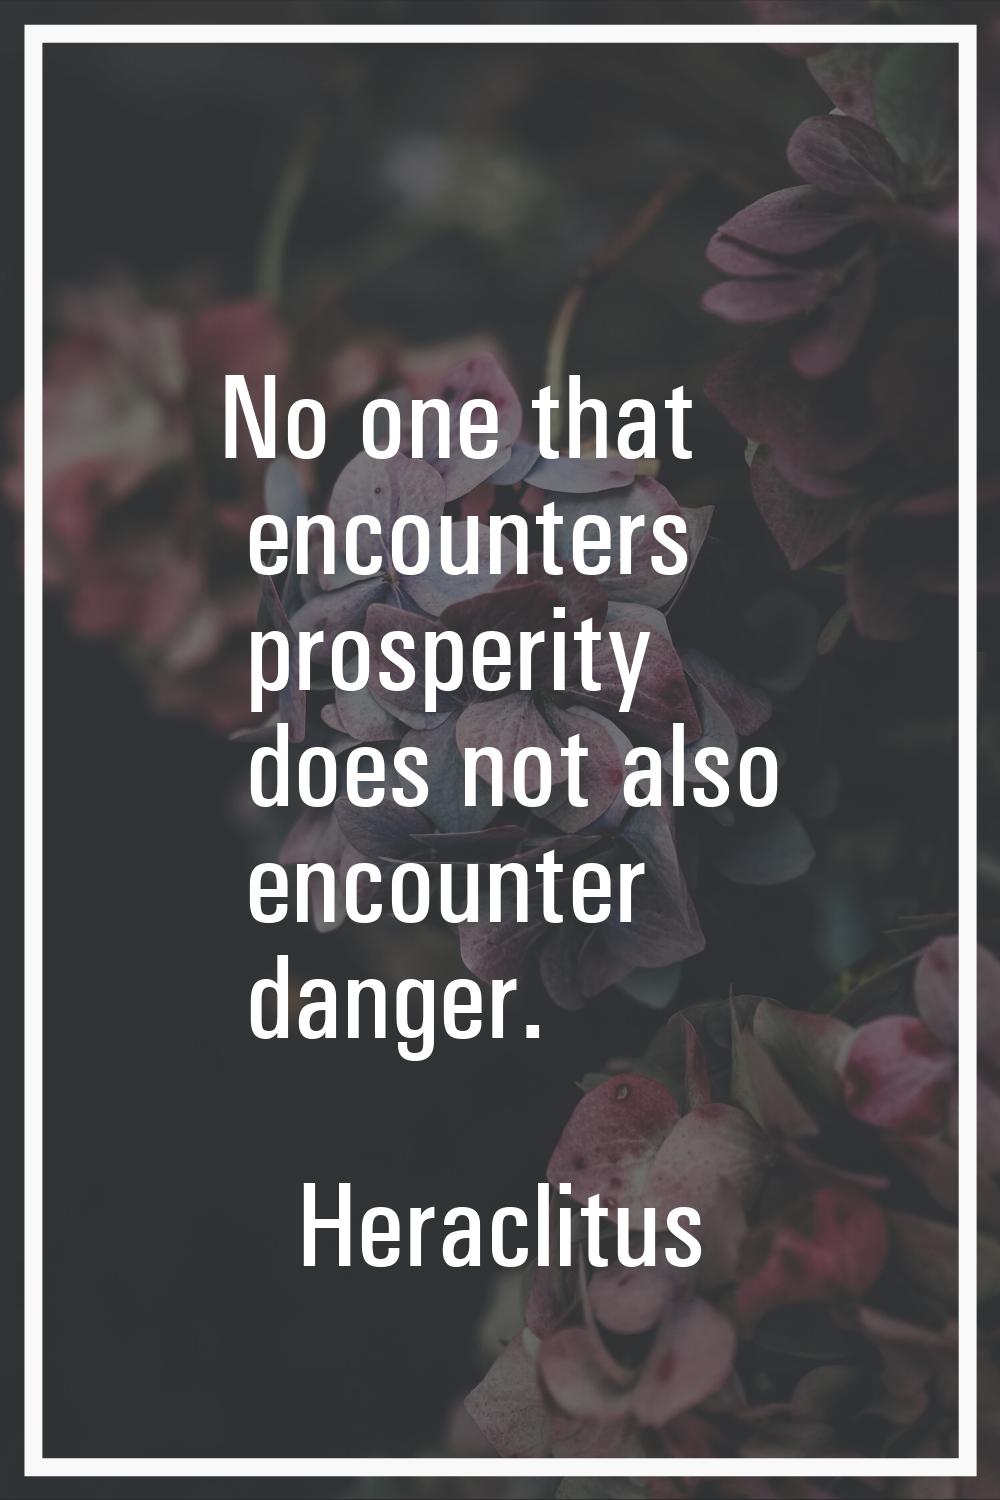 No one that encounters prosperity does not also encounter danger.